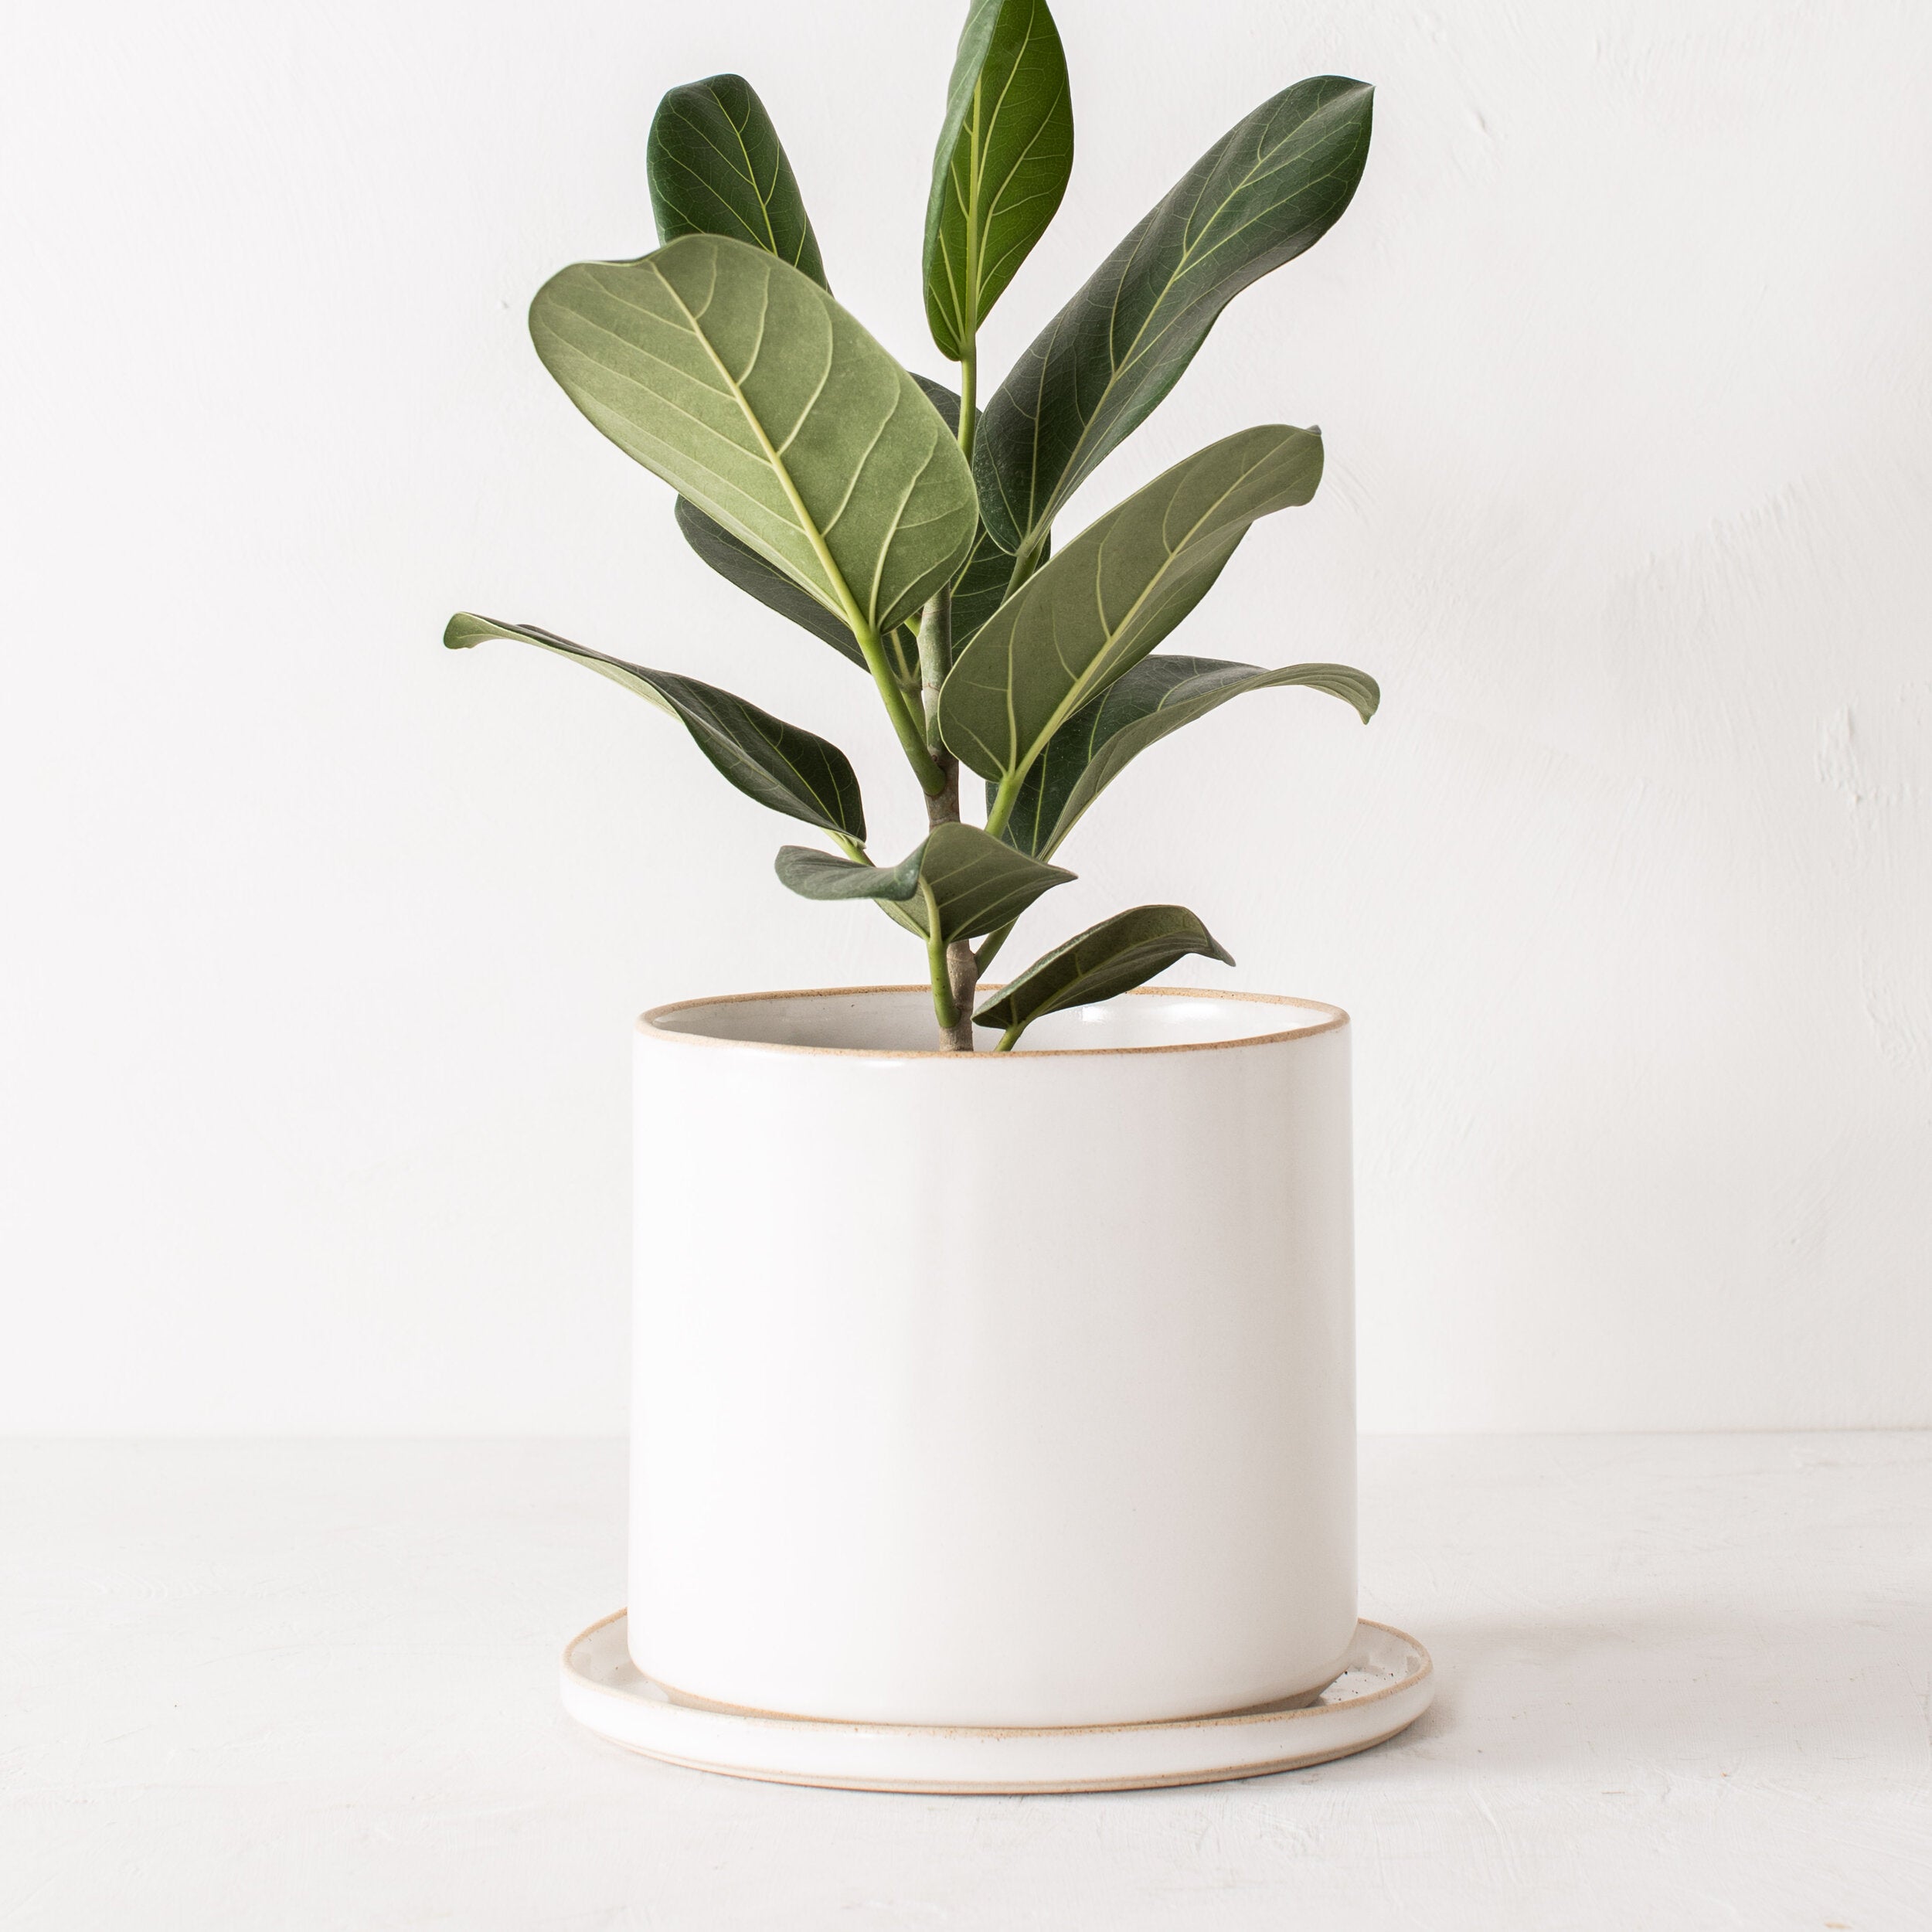 8 inch white ceramic planter with a bottom drainage dish. Staged on a white plaster textured tabletop against a plaster textured white wall. Audrey Ficus plant inside. Designed by Convivial Production, sold by Shop Verdant, Kansas City, Mo plant store.